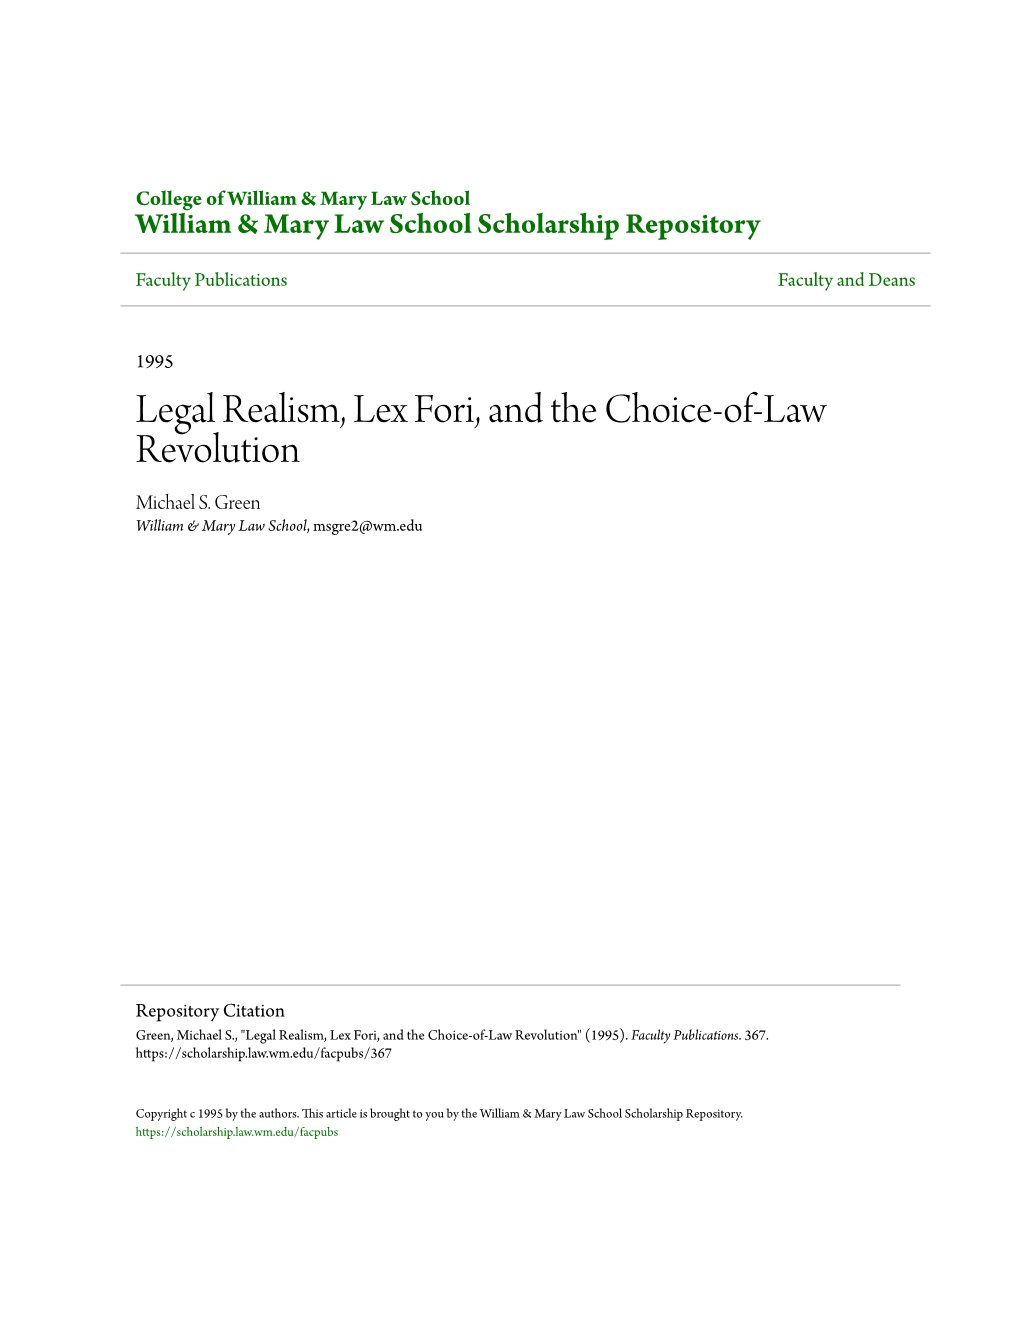 Legal Realism, Lex Fori, and the Choice-Of-Law Revolution Michael S